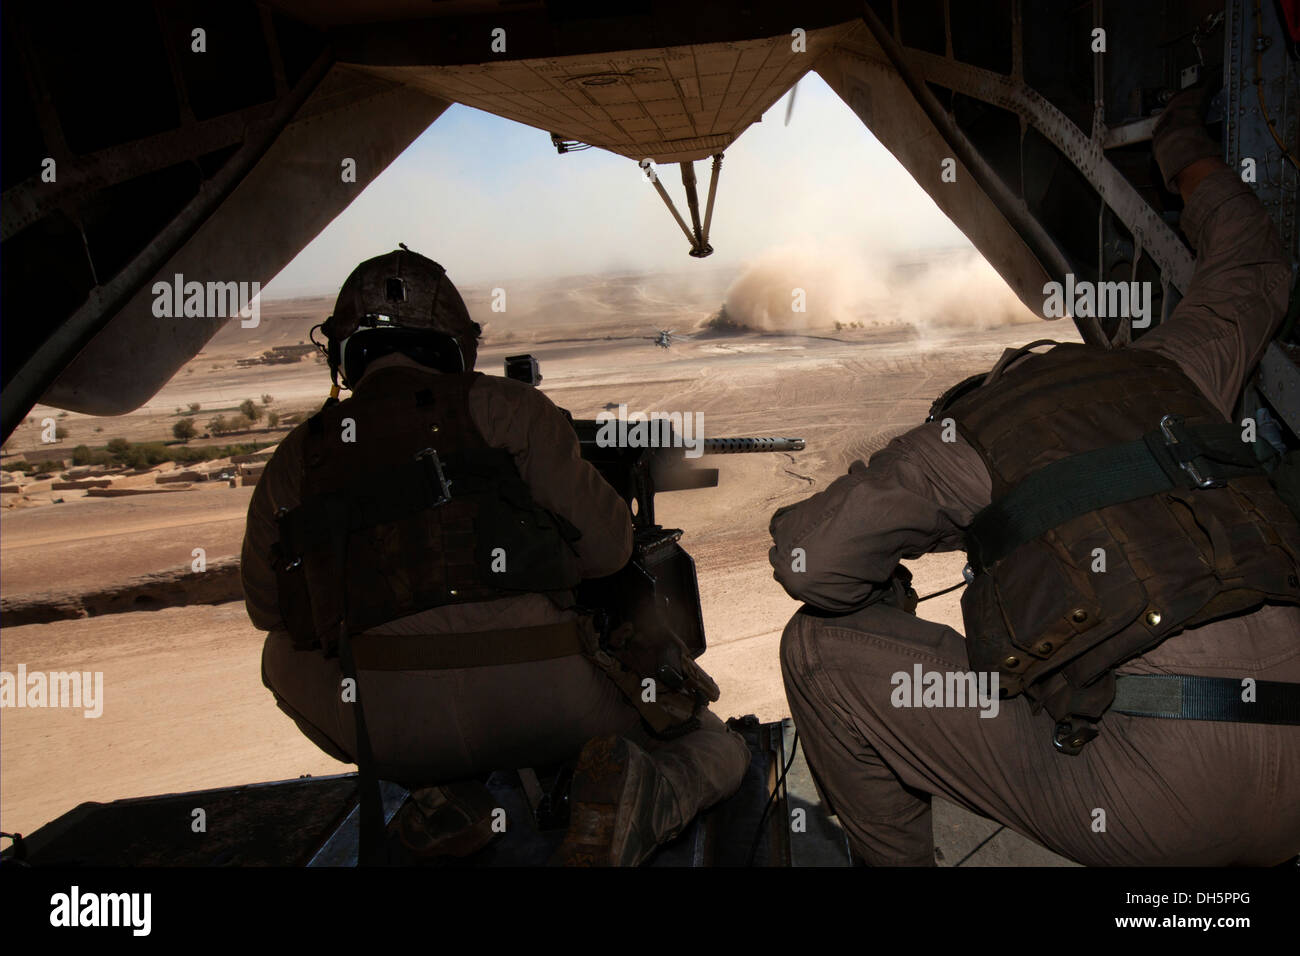 U.S. Marines Cpl. Ryan L. Avery, left, a crew chief, and Lance Cpl. Michael J. McGrath, a CH-53E Super Stallion mechanic, both with Marine Heavy Helicopter Squadron 462 (HMH-462), provide aerial security over Gurjat Village, Helmand province, Afghanistan, Stock Photo